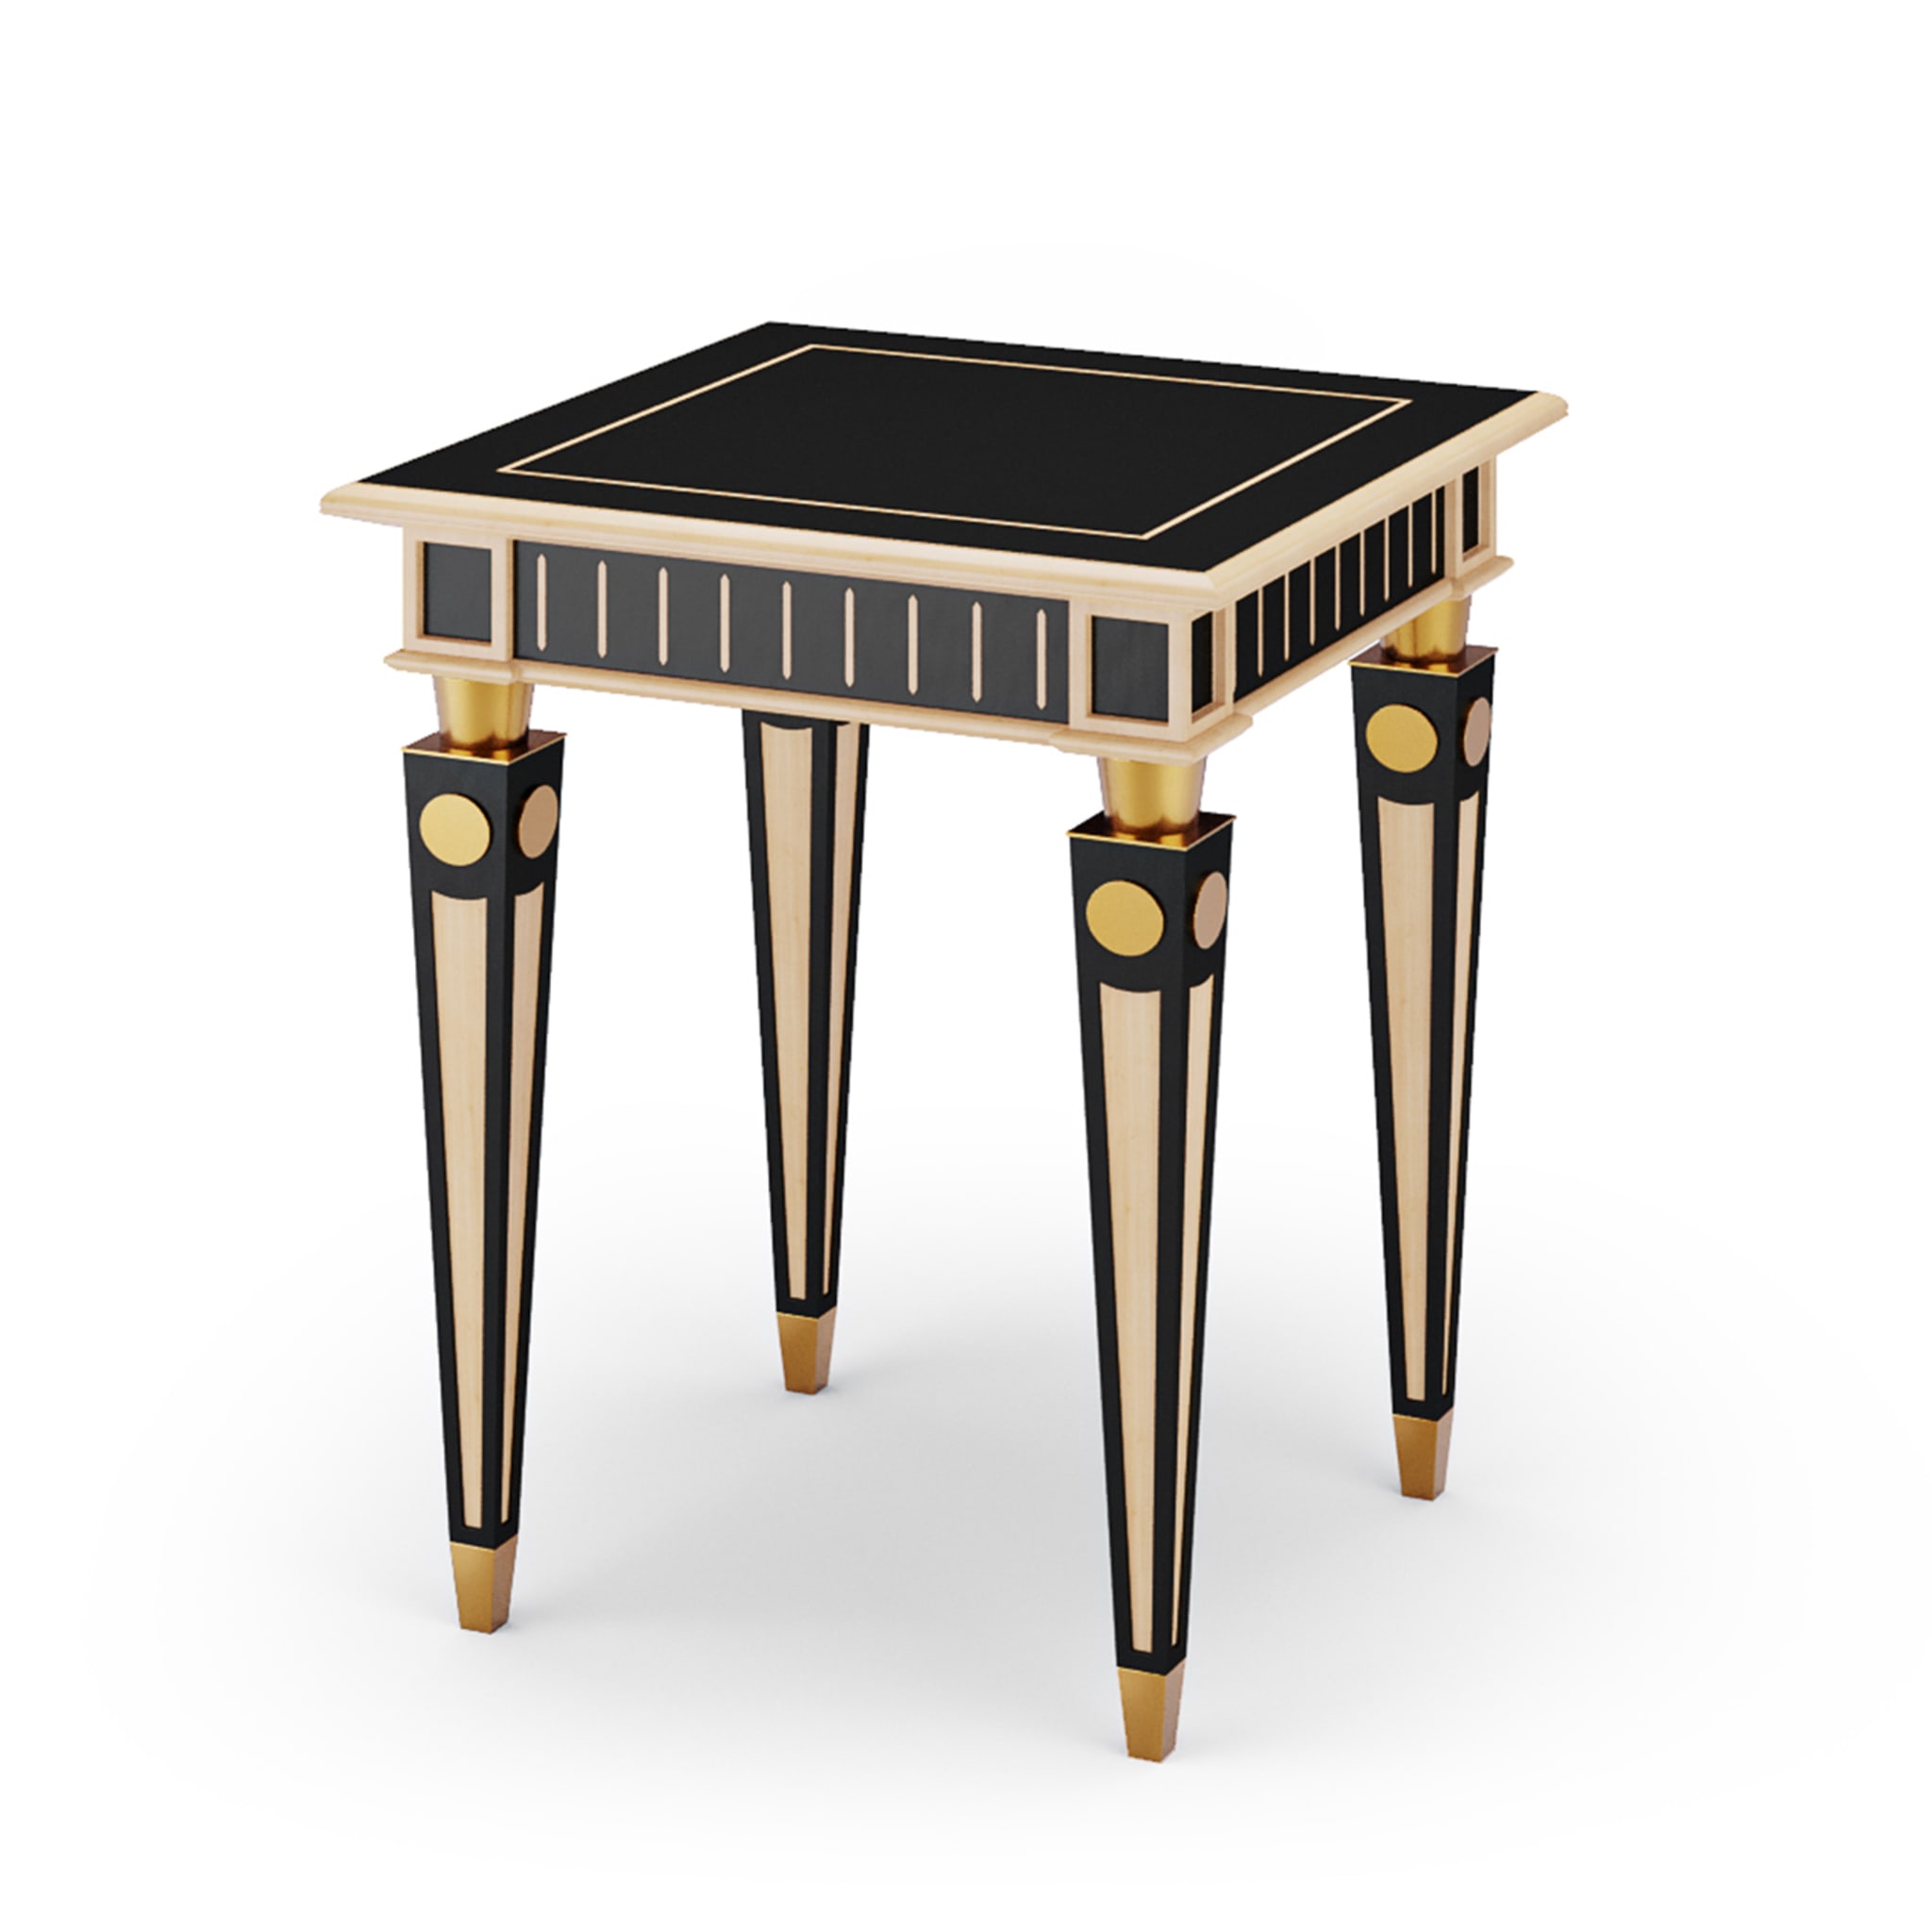 Deco Blackened Wood & Maple Side Table - Alternative view 2